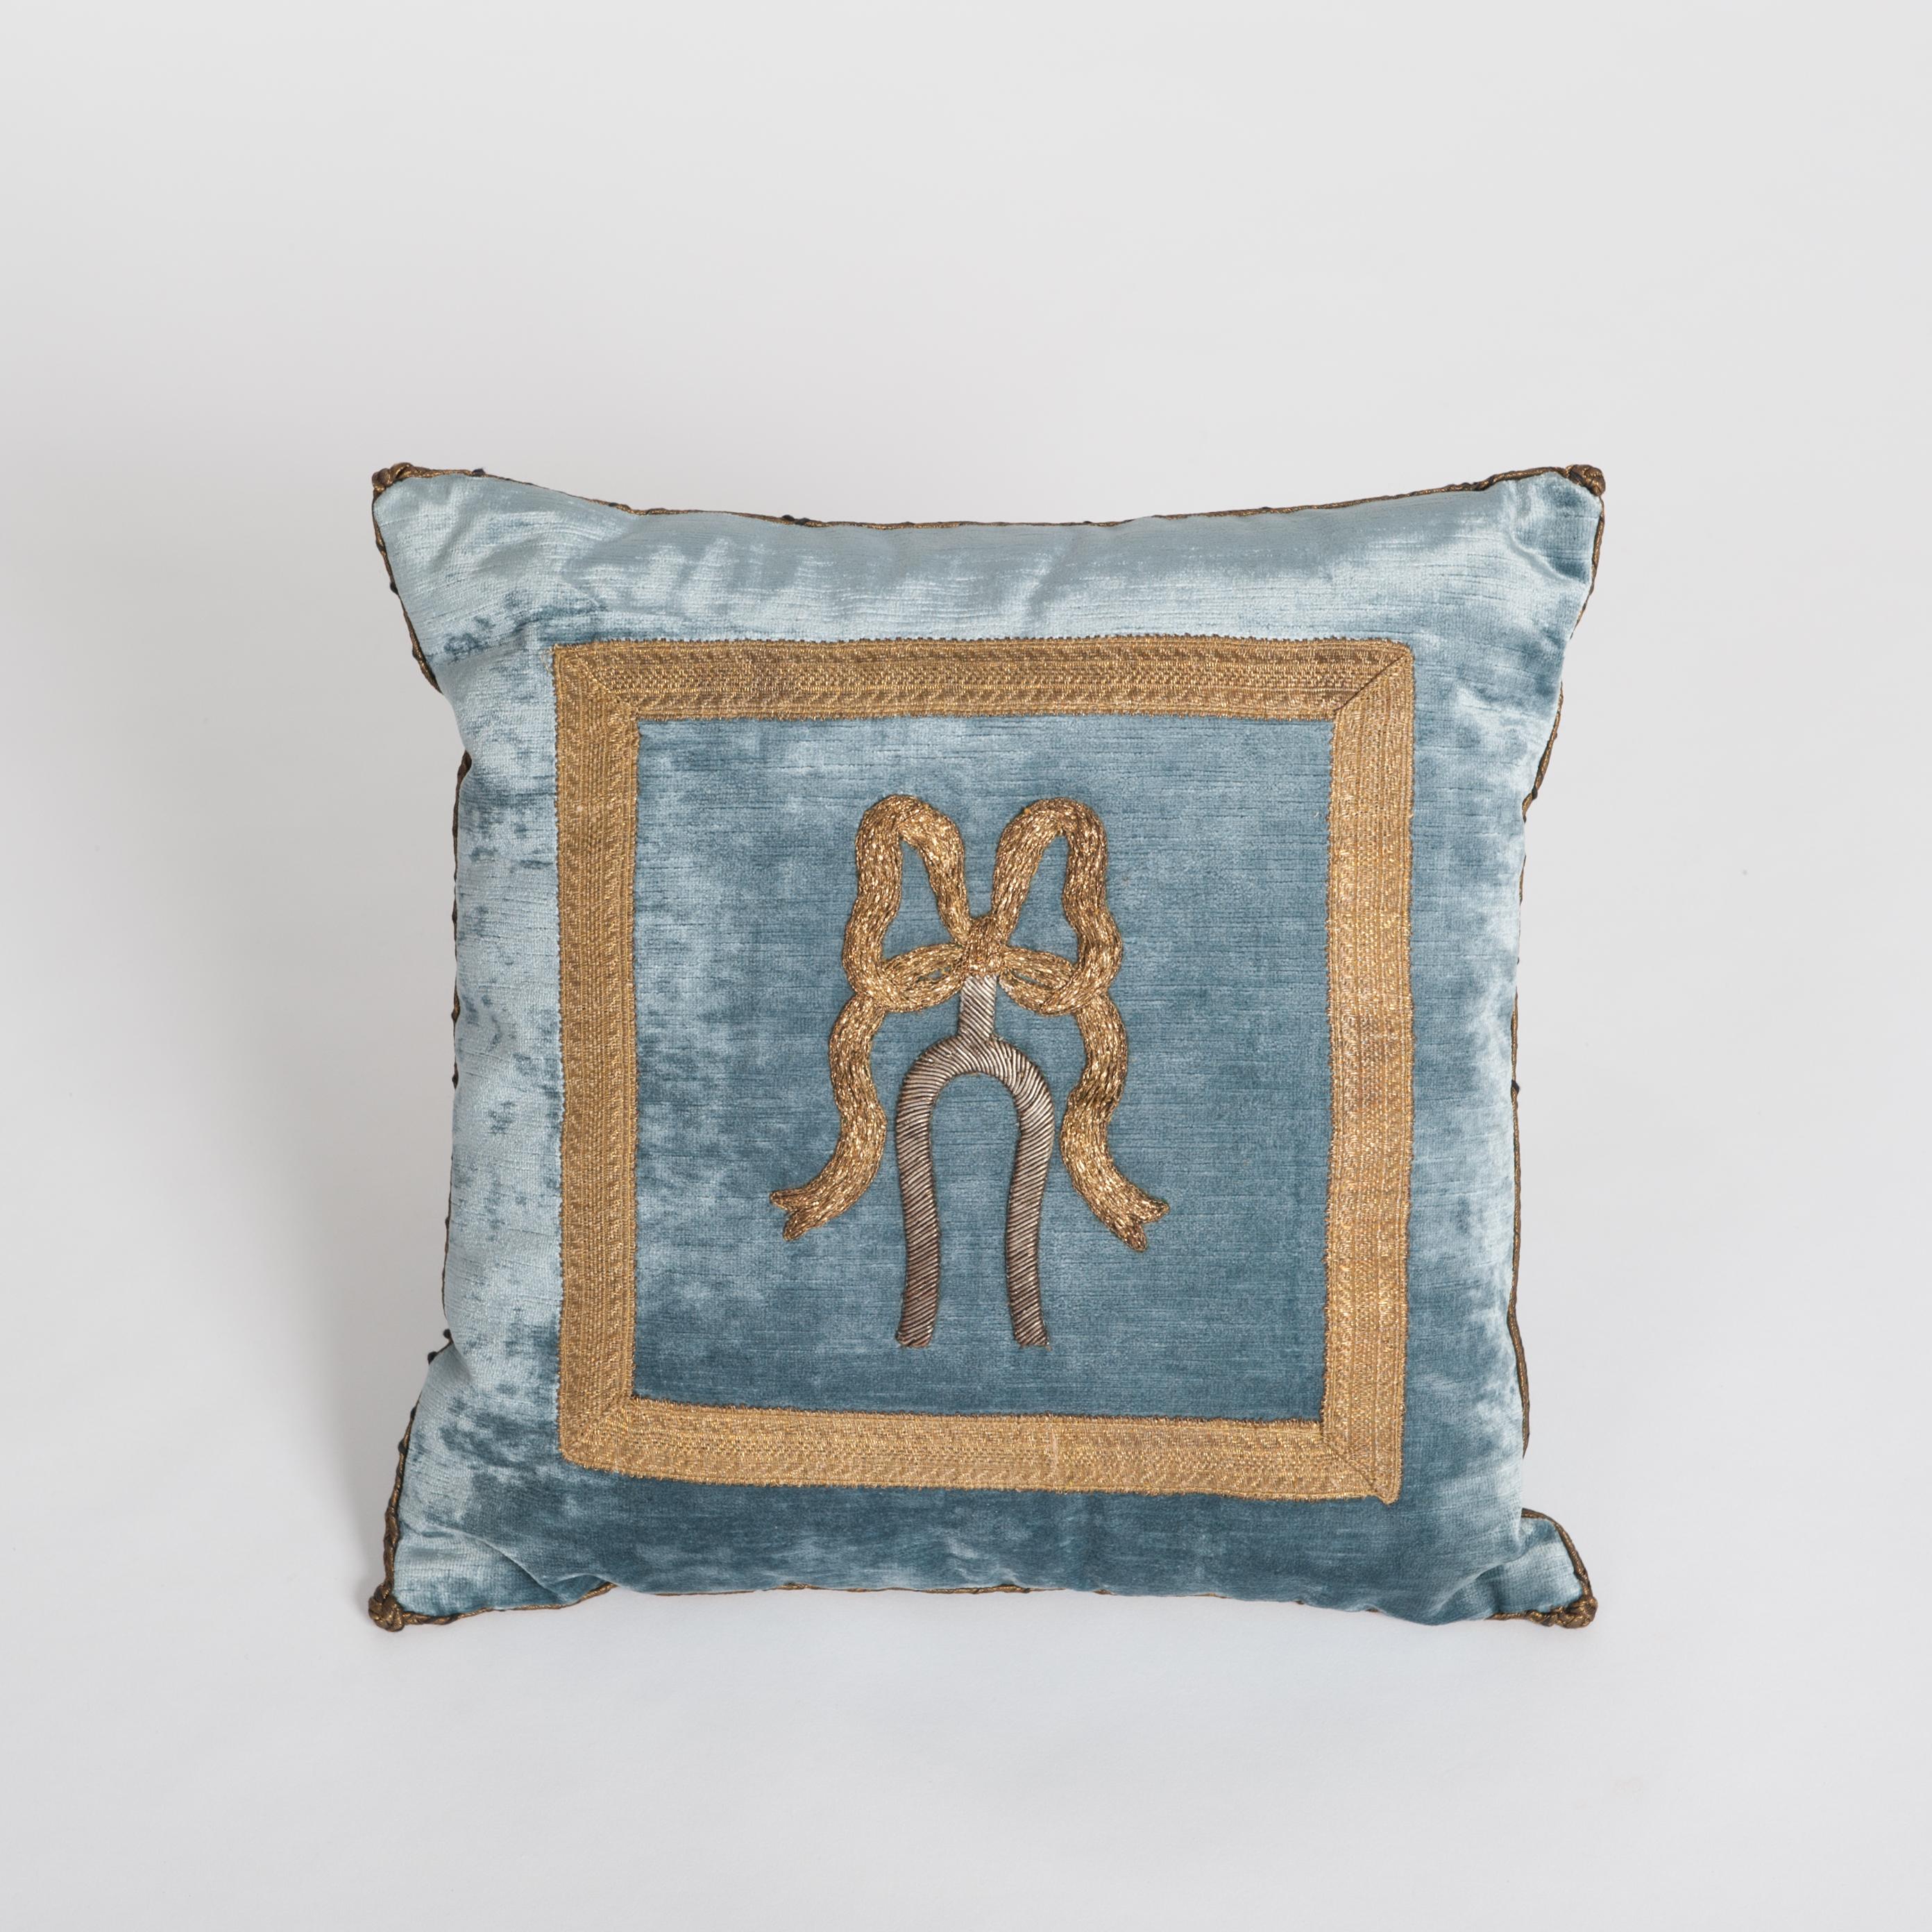 Appliqué Pillow with Antique Silver and Gold Metallic Embroidery on French Blue Velvet